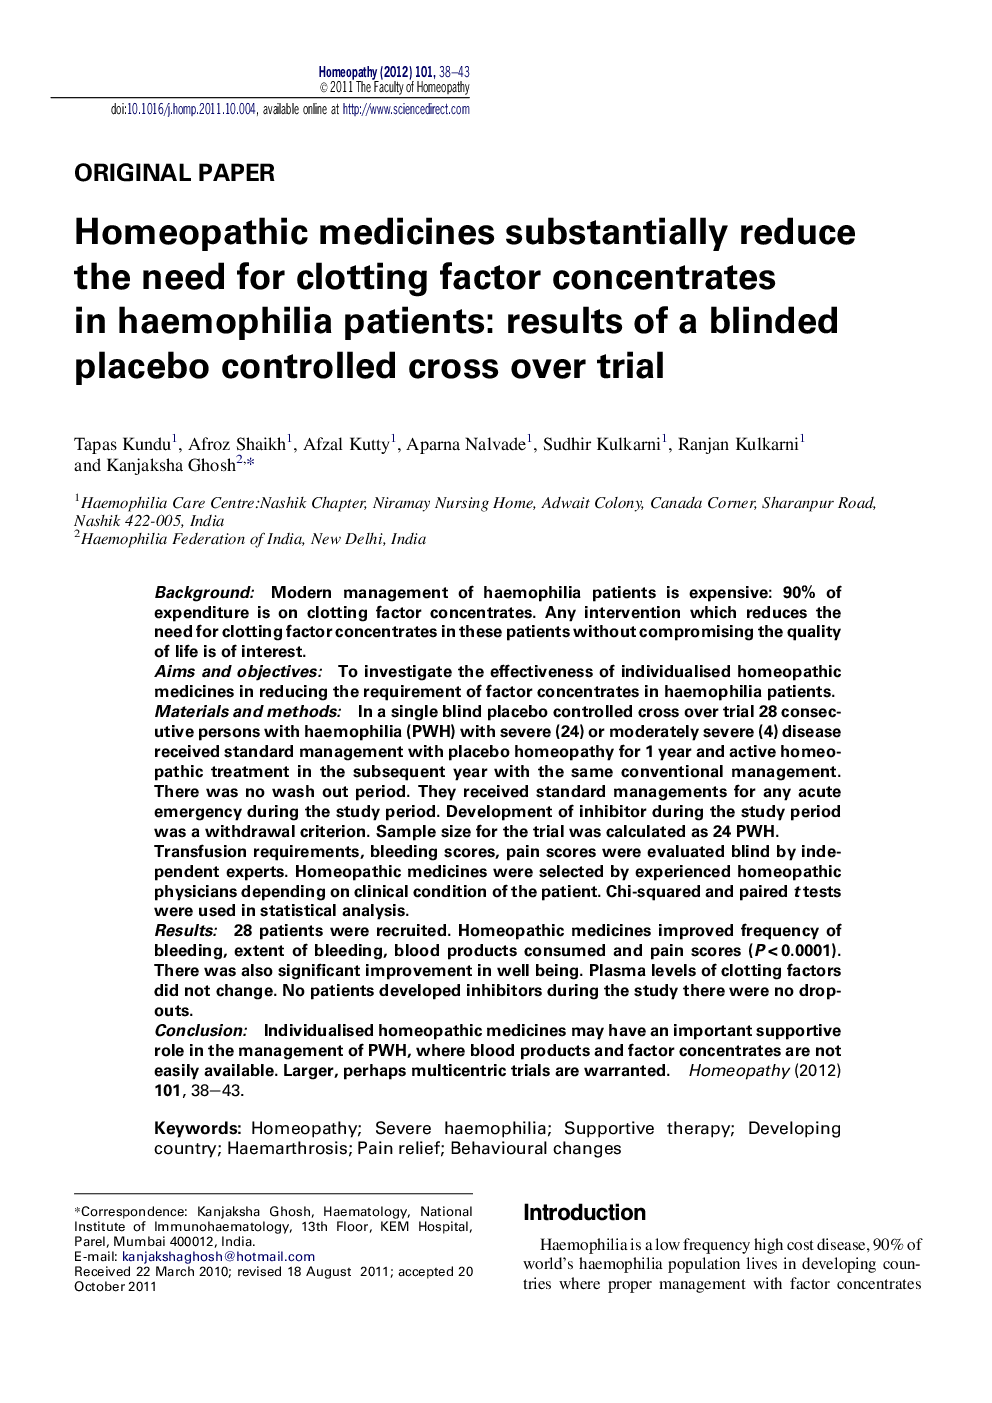 Homeopathic medicines substantially reduce the need for clotting factor concentrates in haemophilia patients: results of a blinded placebo controlled cross over trial